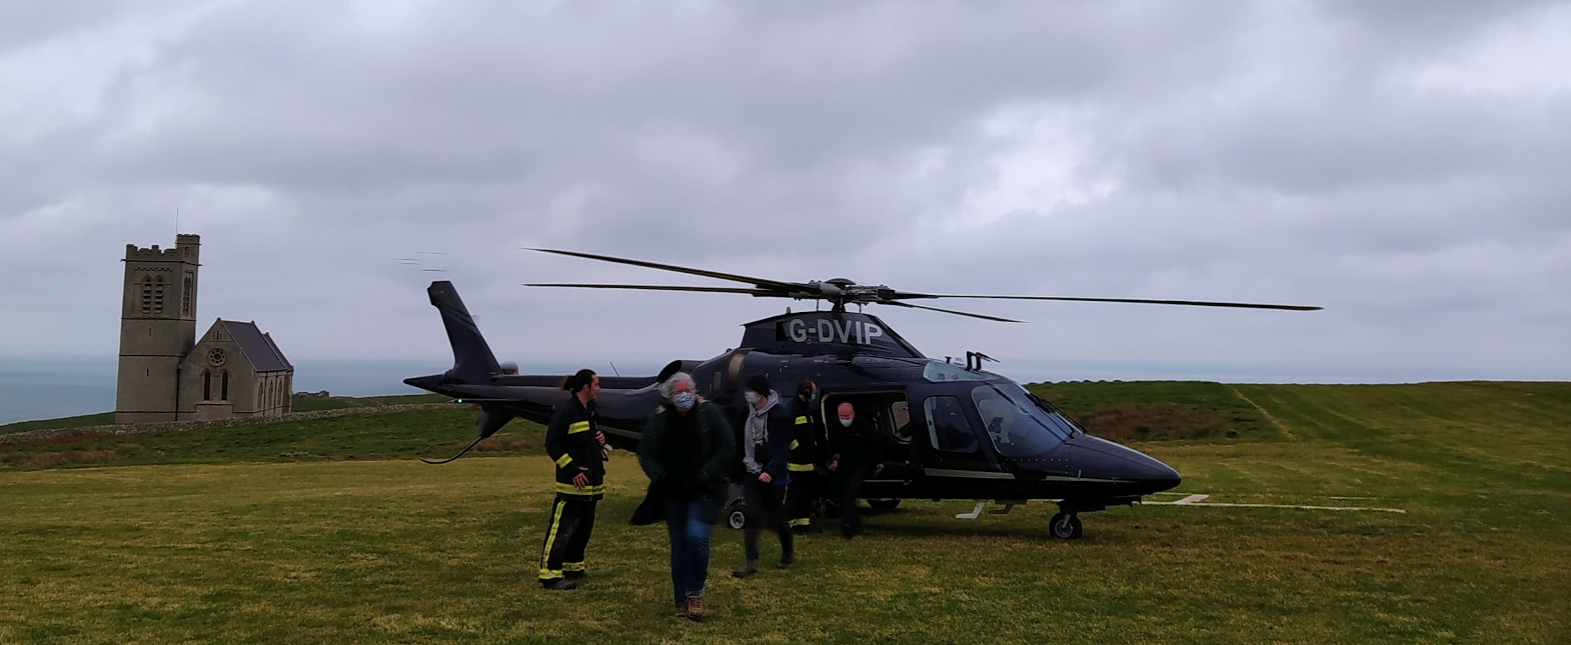 A photo showing the helicopter that took the students to the island of Lundy